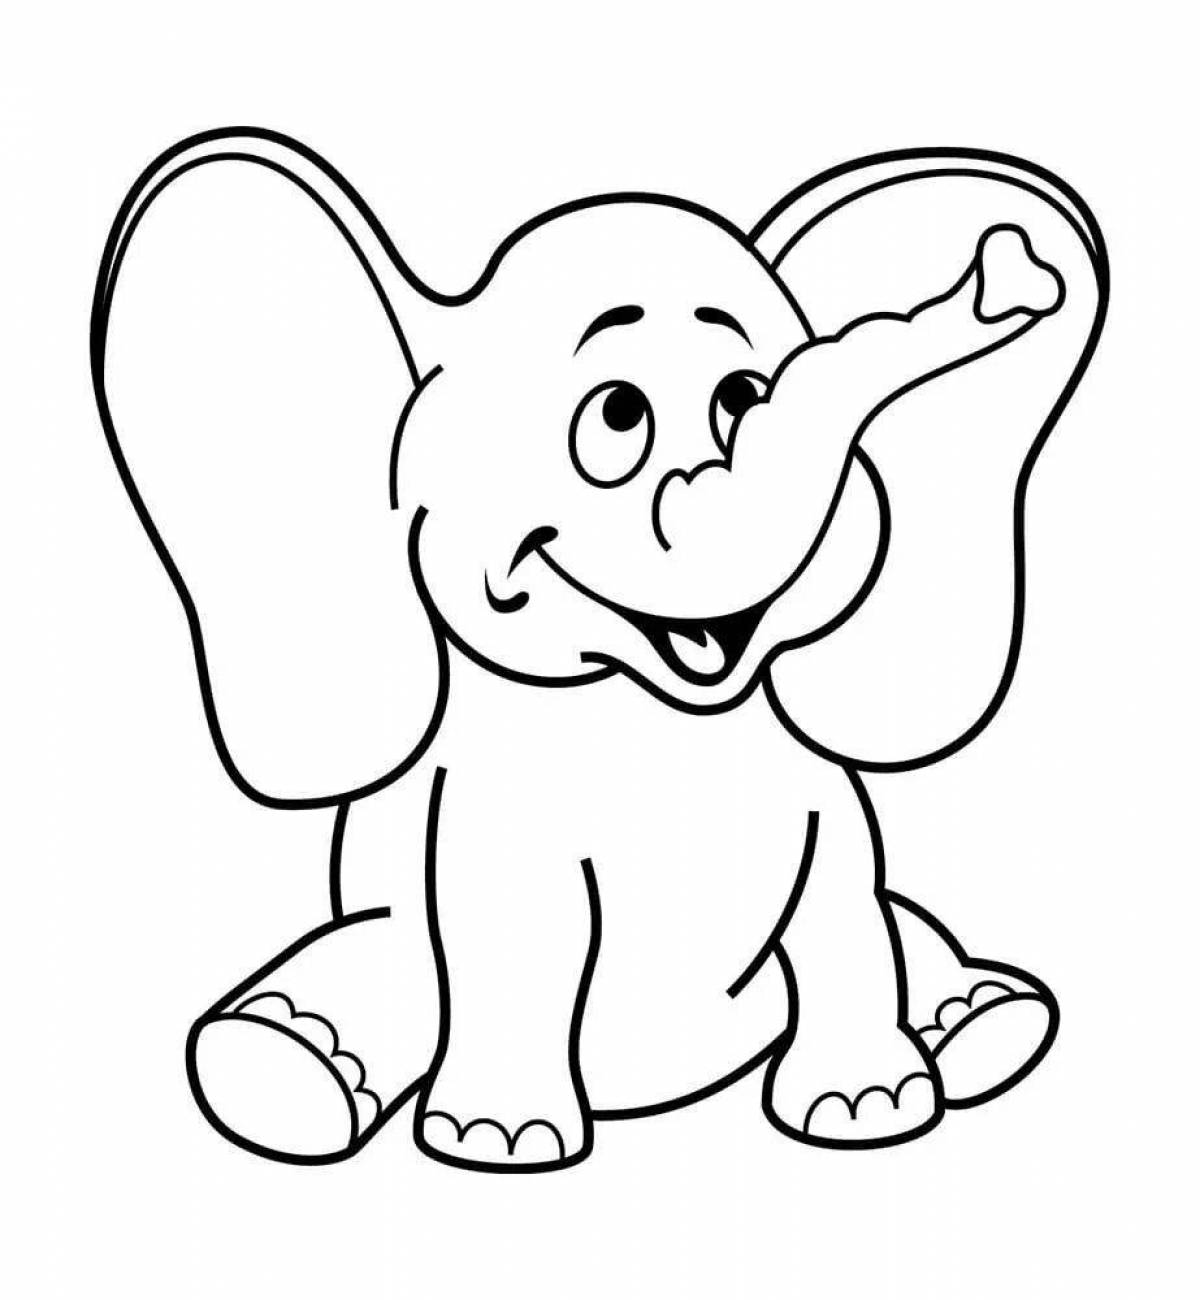 Coloring book brave elephant